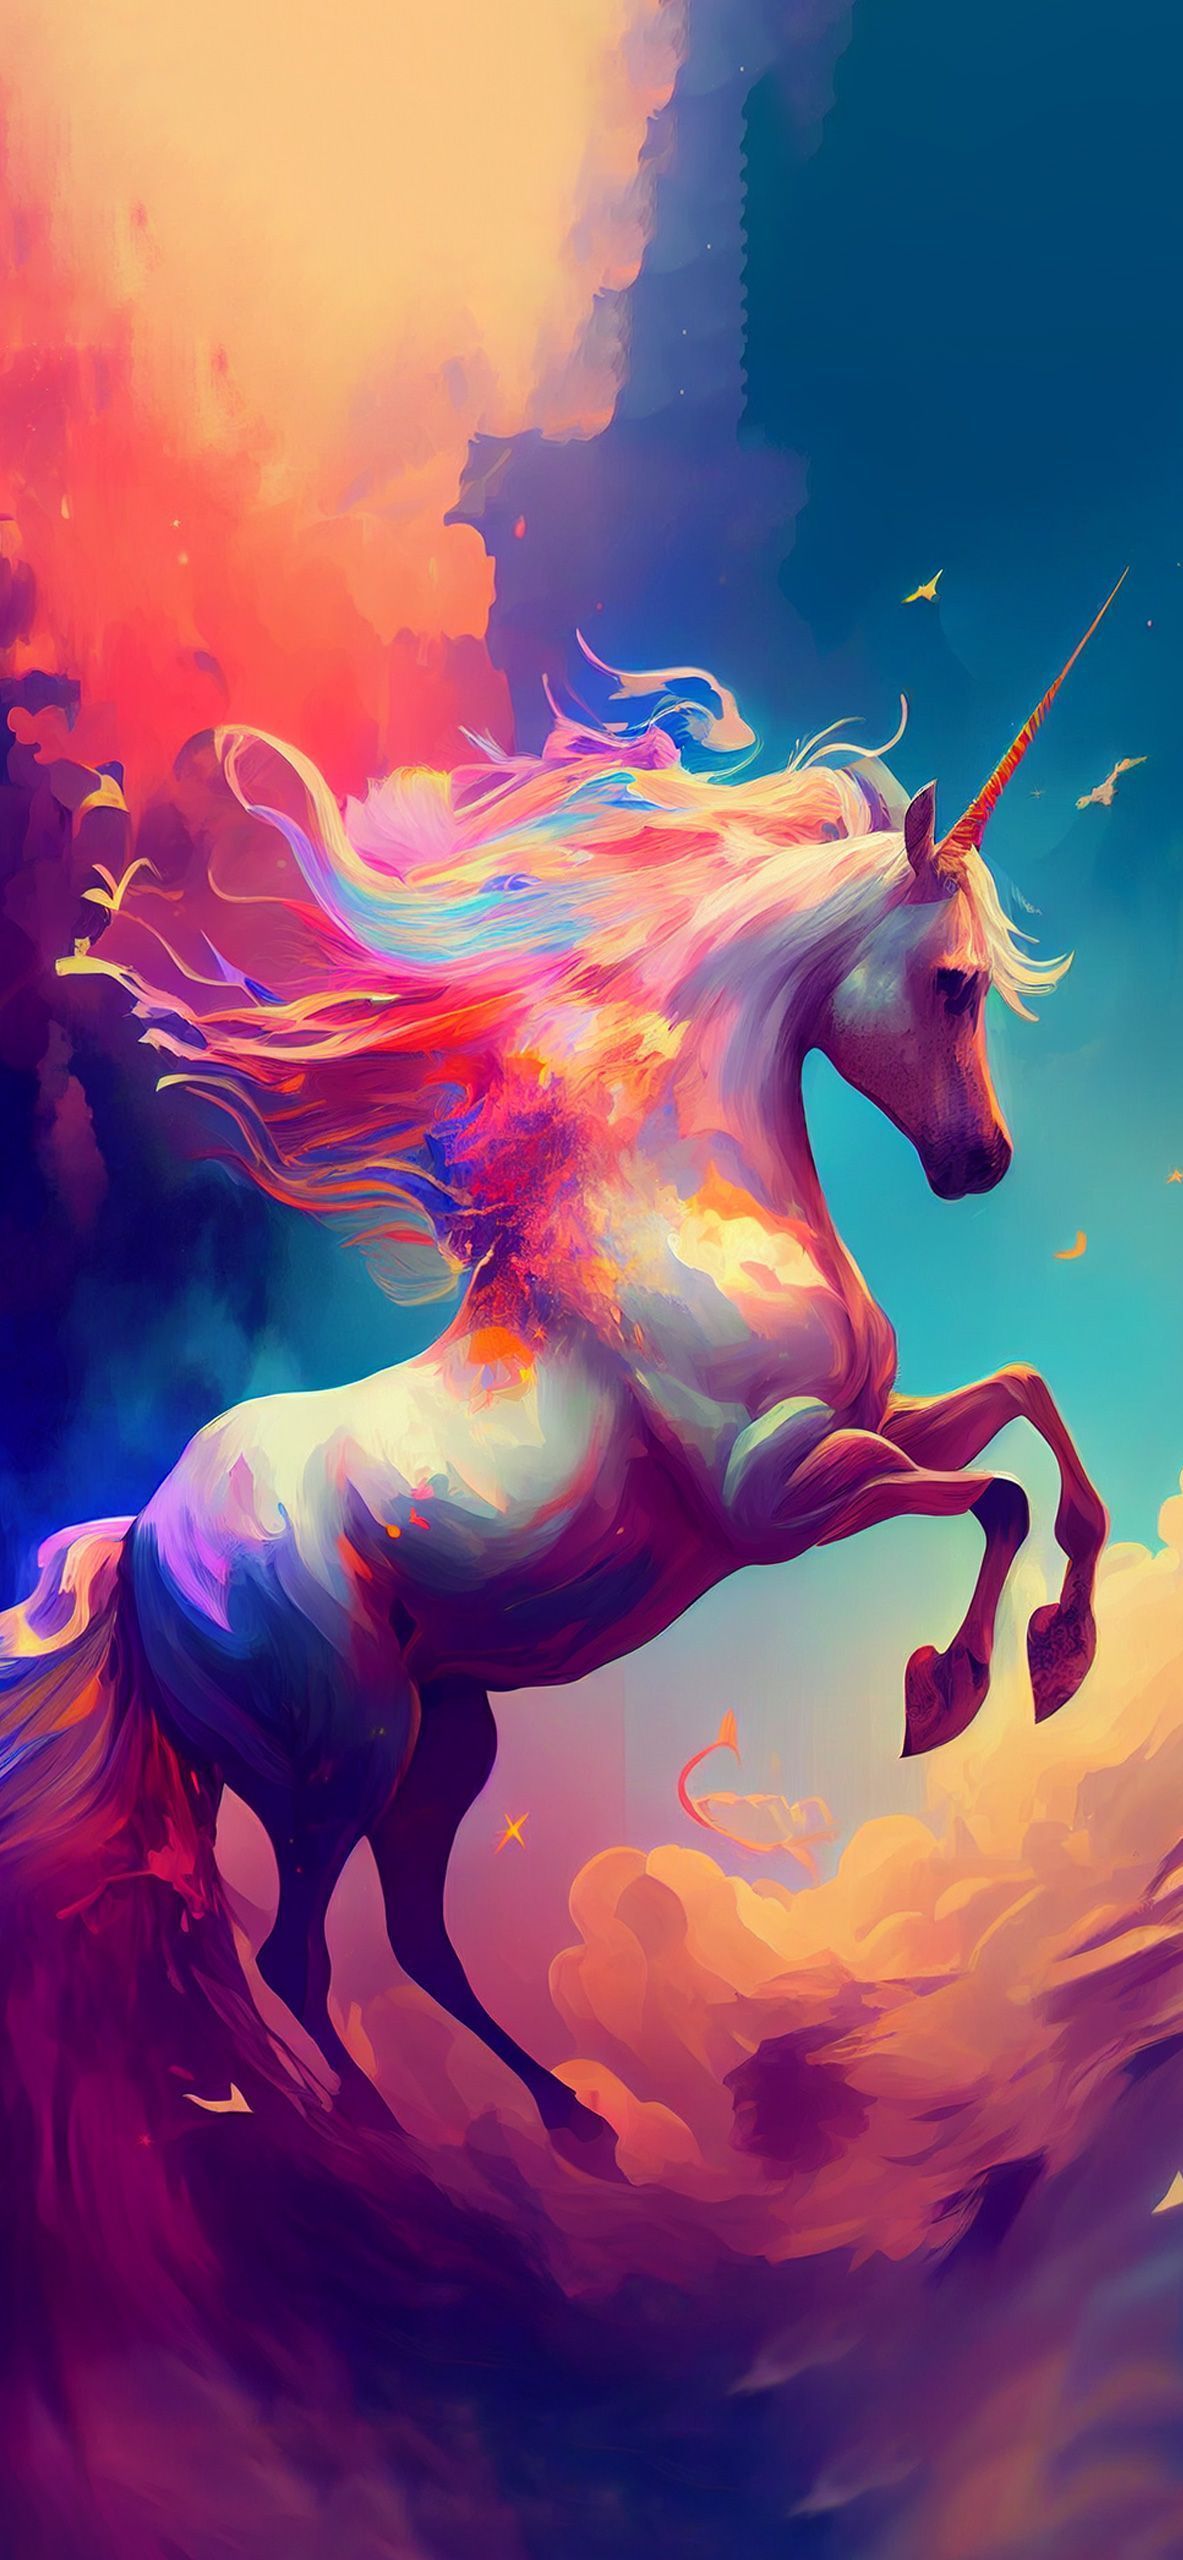 Download wallpapers 1080x1920 fantasy art, painting, unicorn, rainbow, colorful, digital art, art background, illustration, wallpaper, abstract art for desktop and mobile devices in any resolution - Horse, unicorn